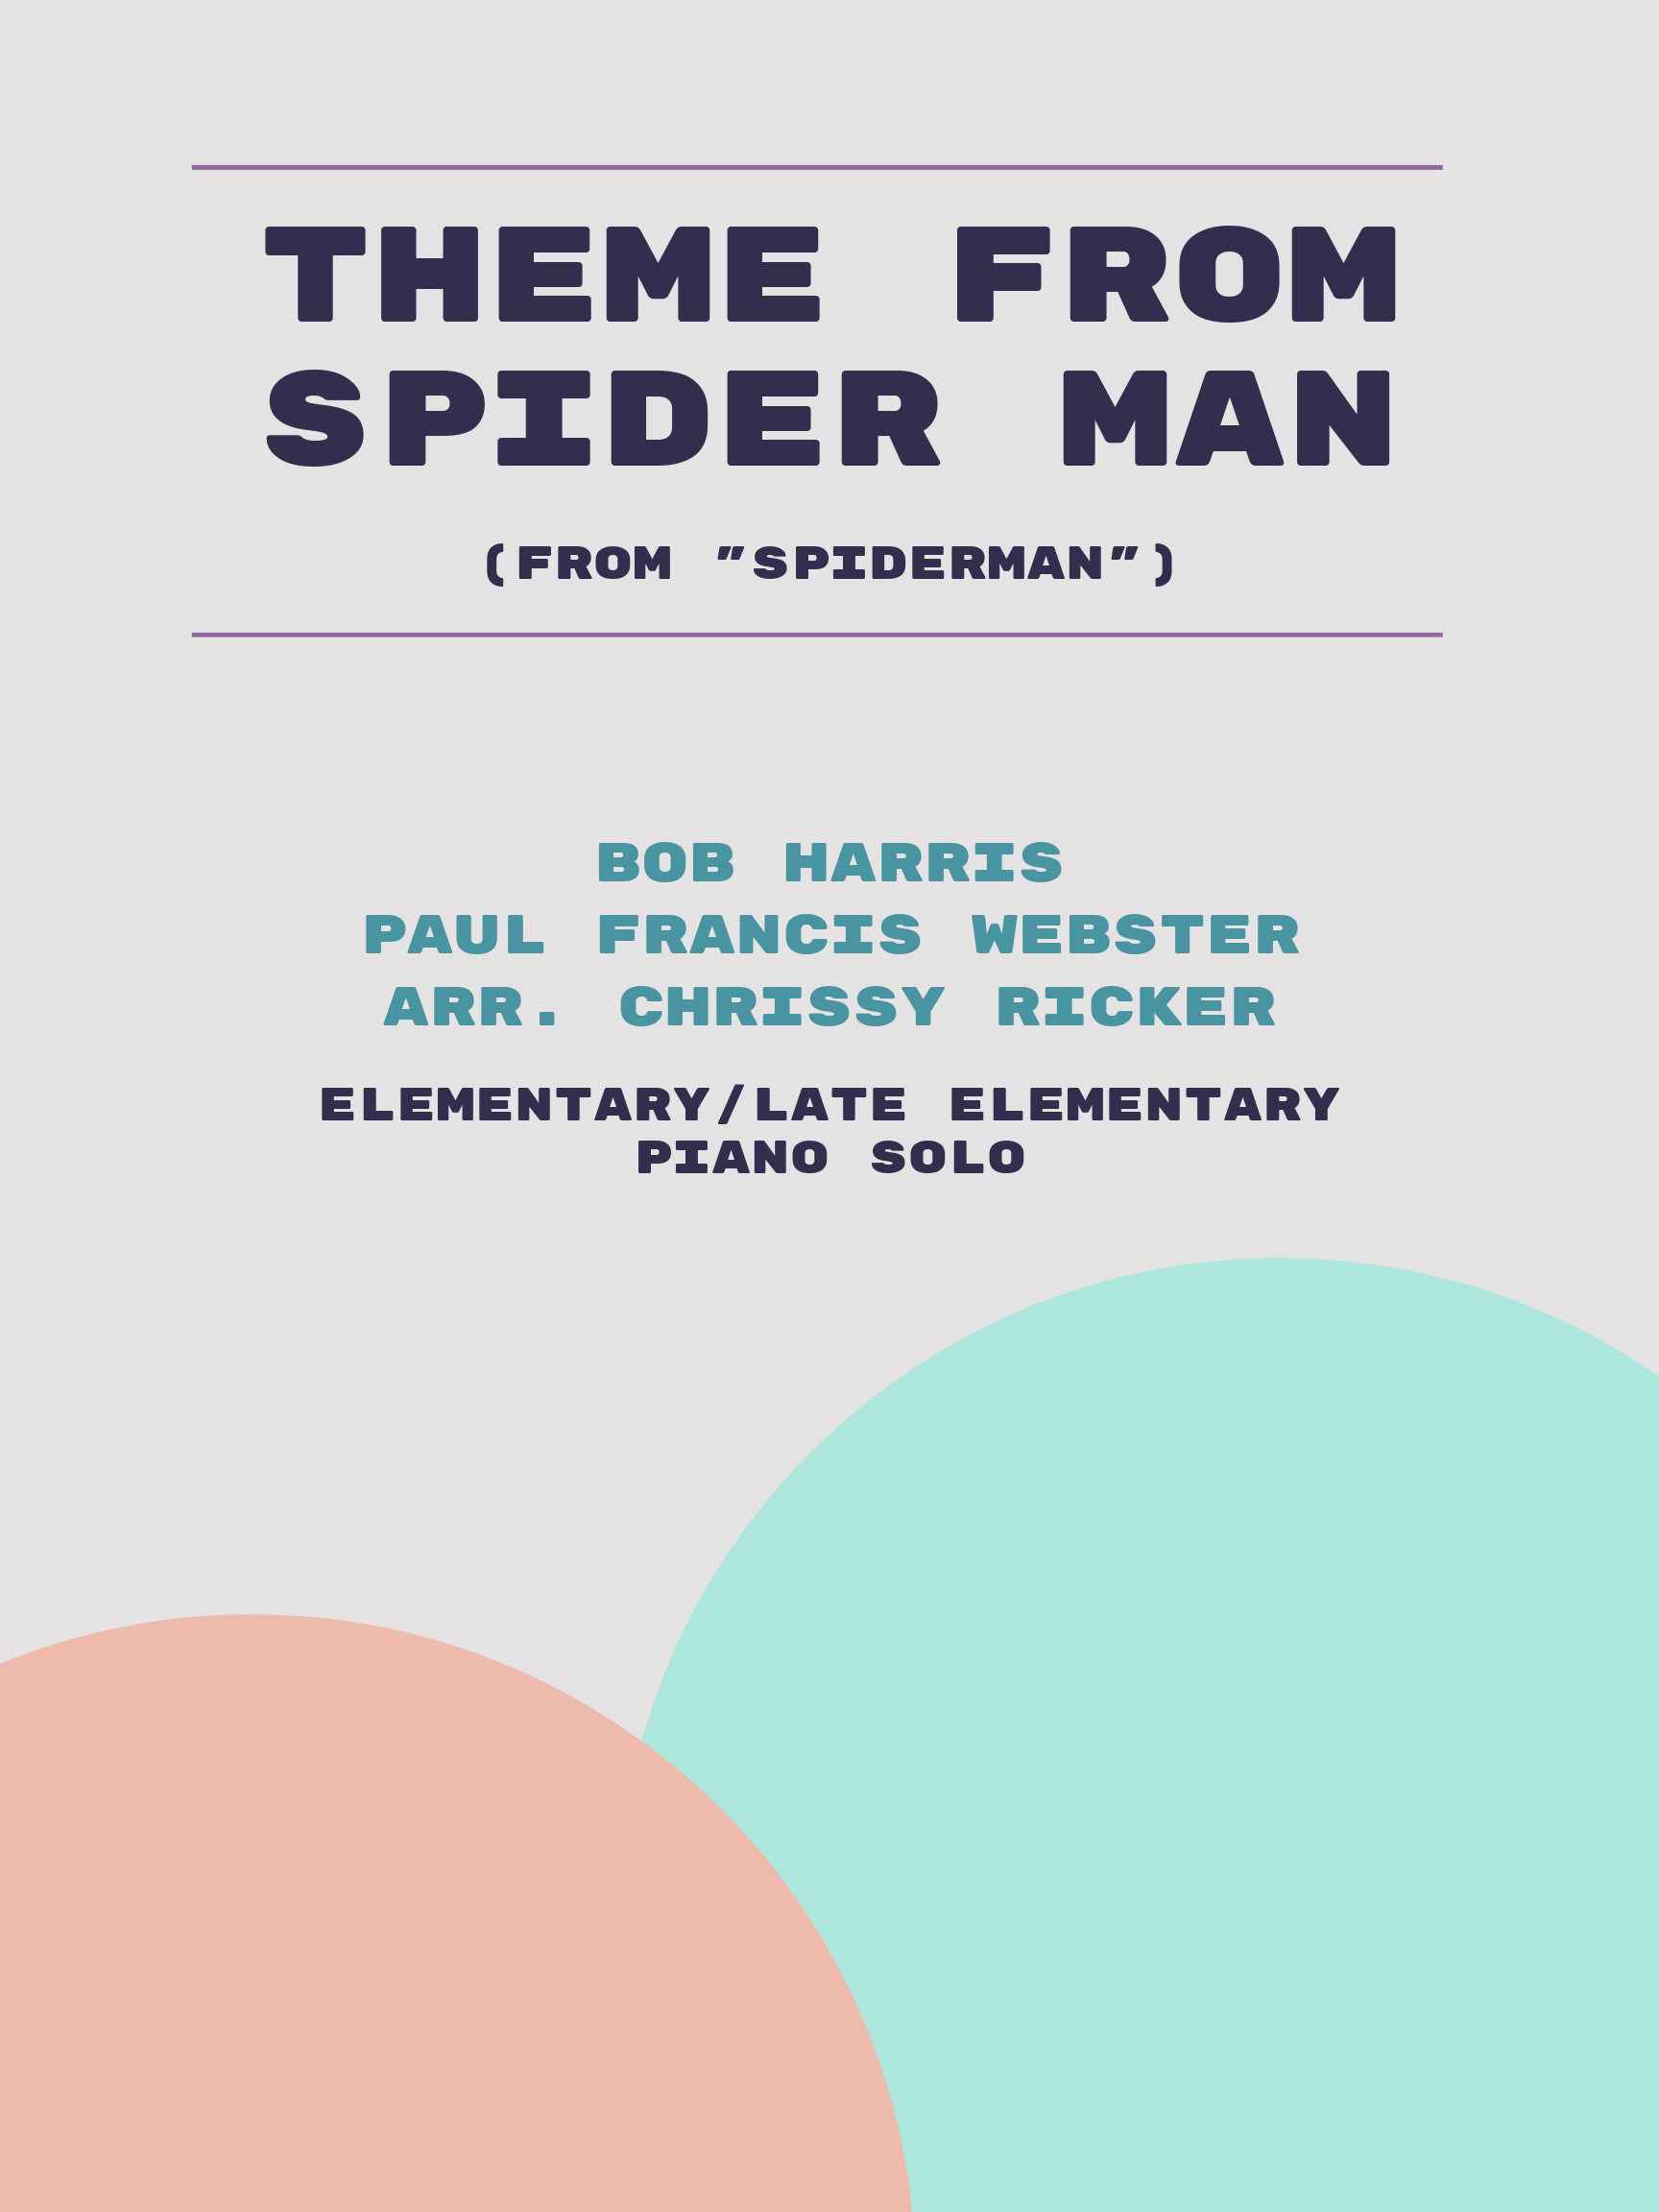 Theme from Spider Man by Bob Harris, Paul Francis Webster